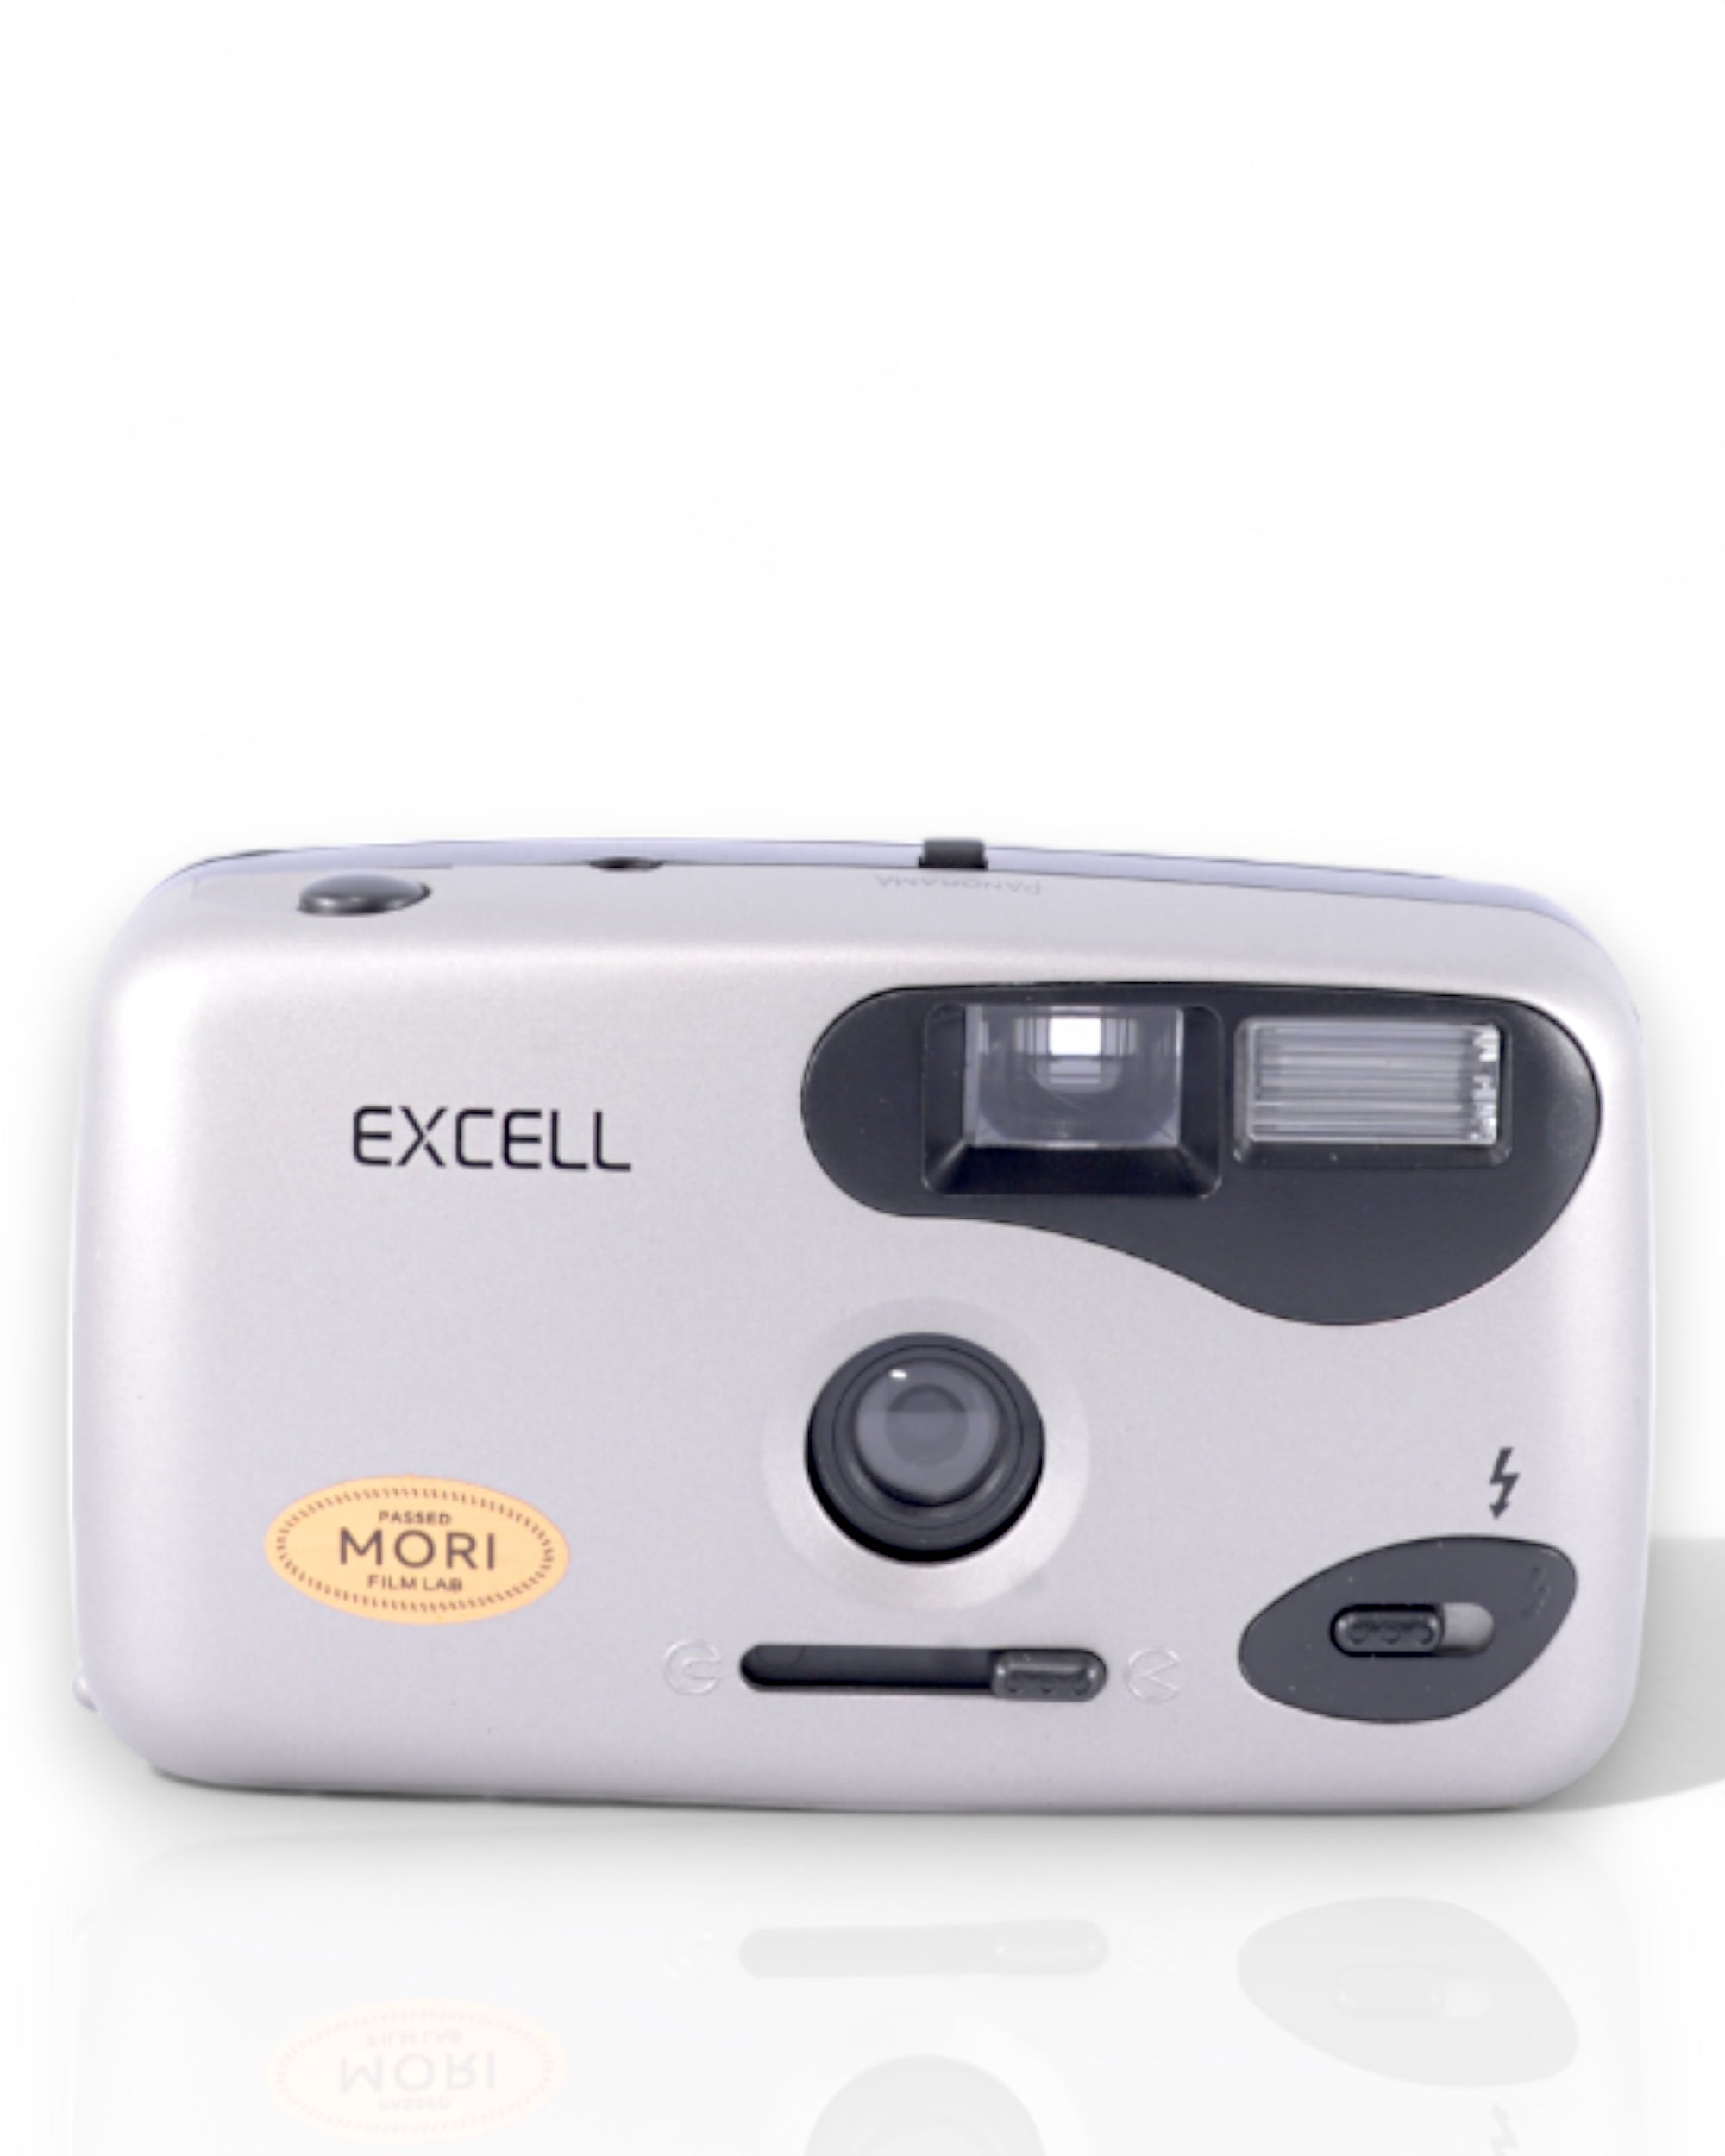 Excell 35mm point & shoot camera